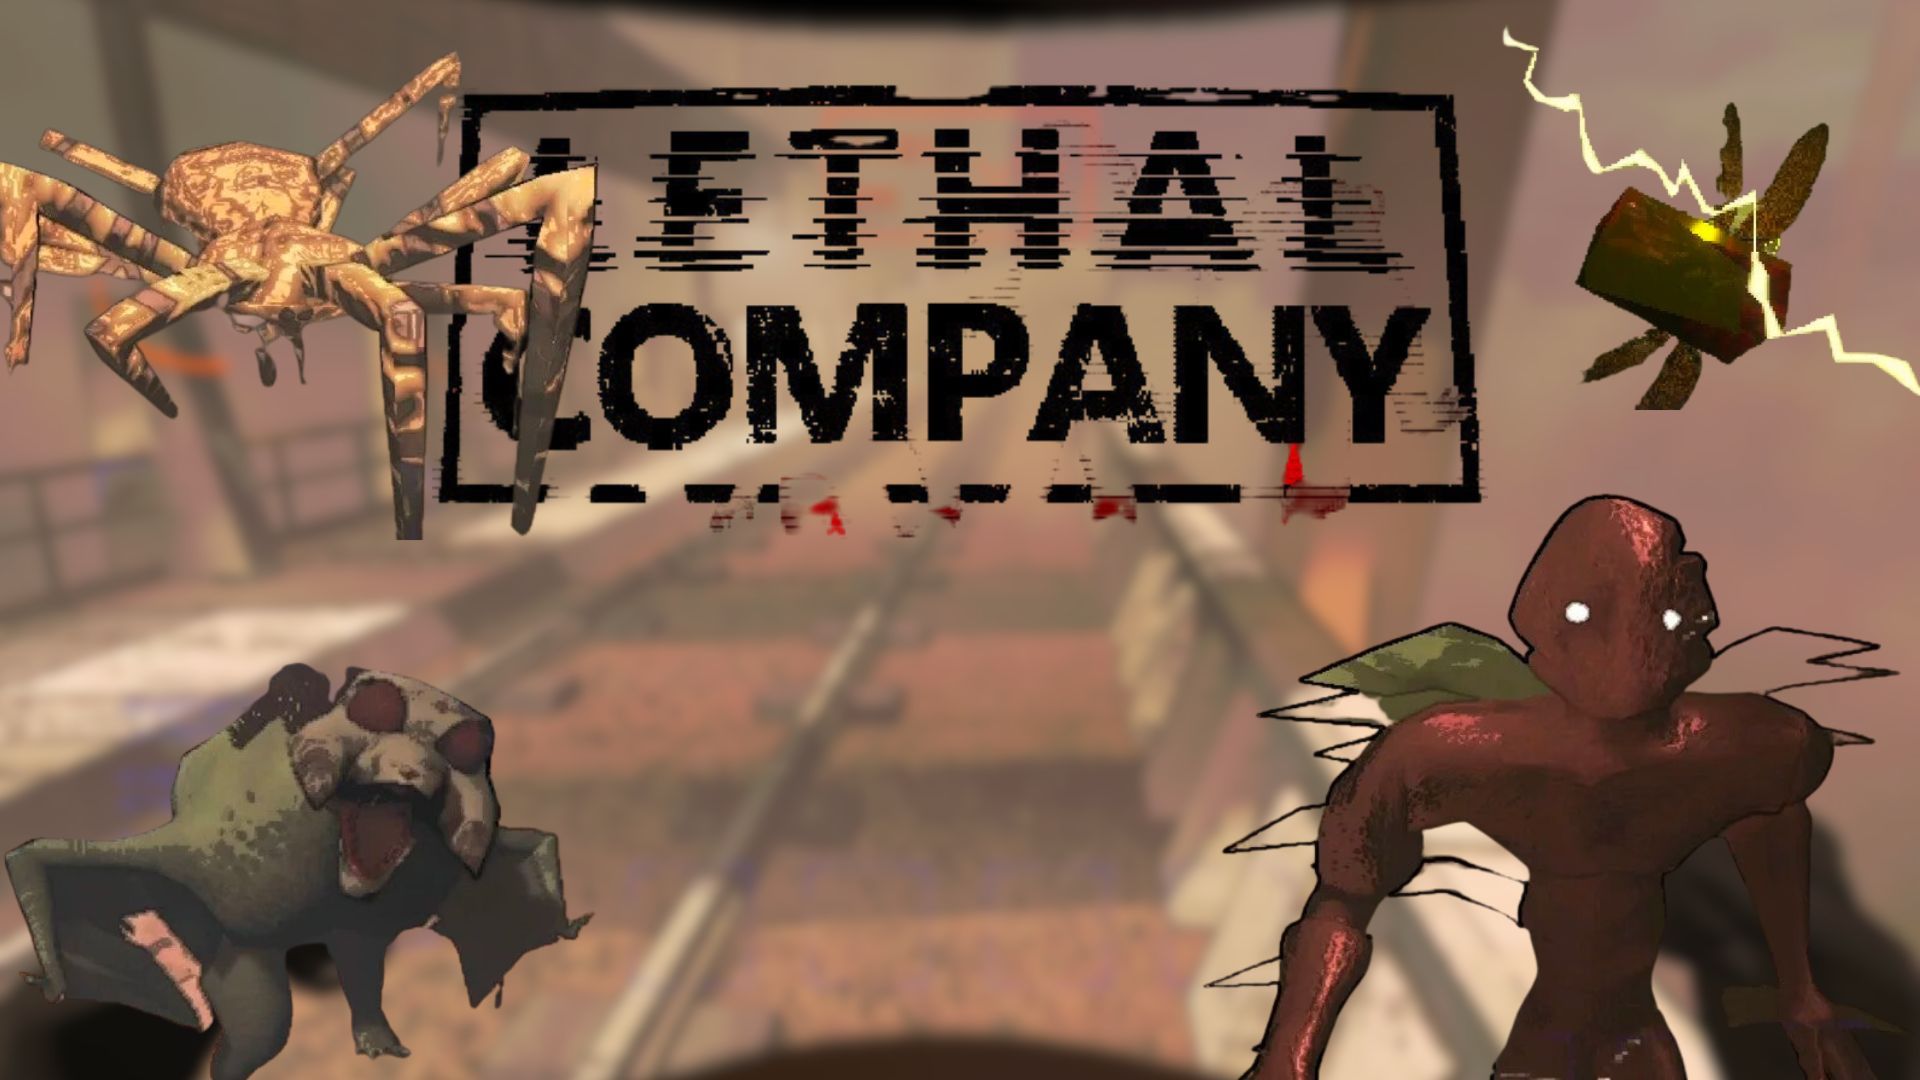 Lethal Company Monsters - Lethal Company Guide - IGN